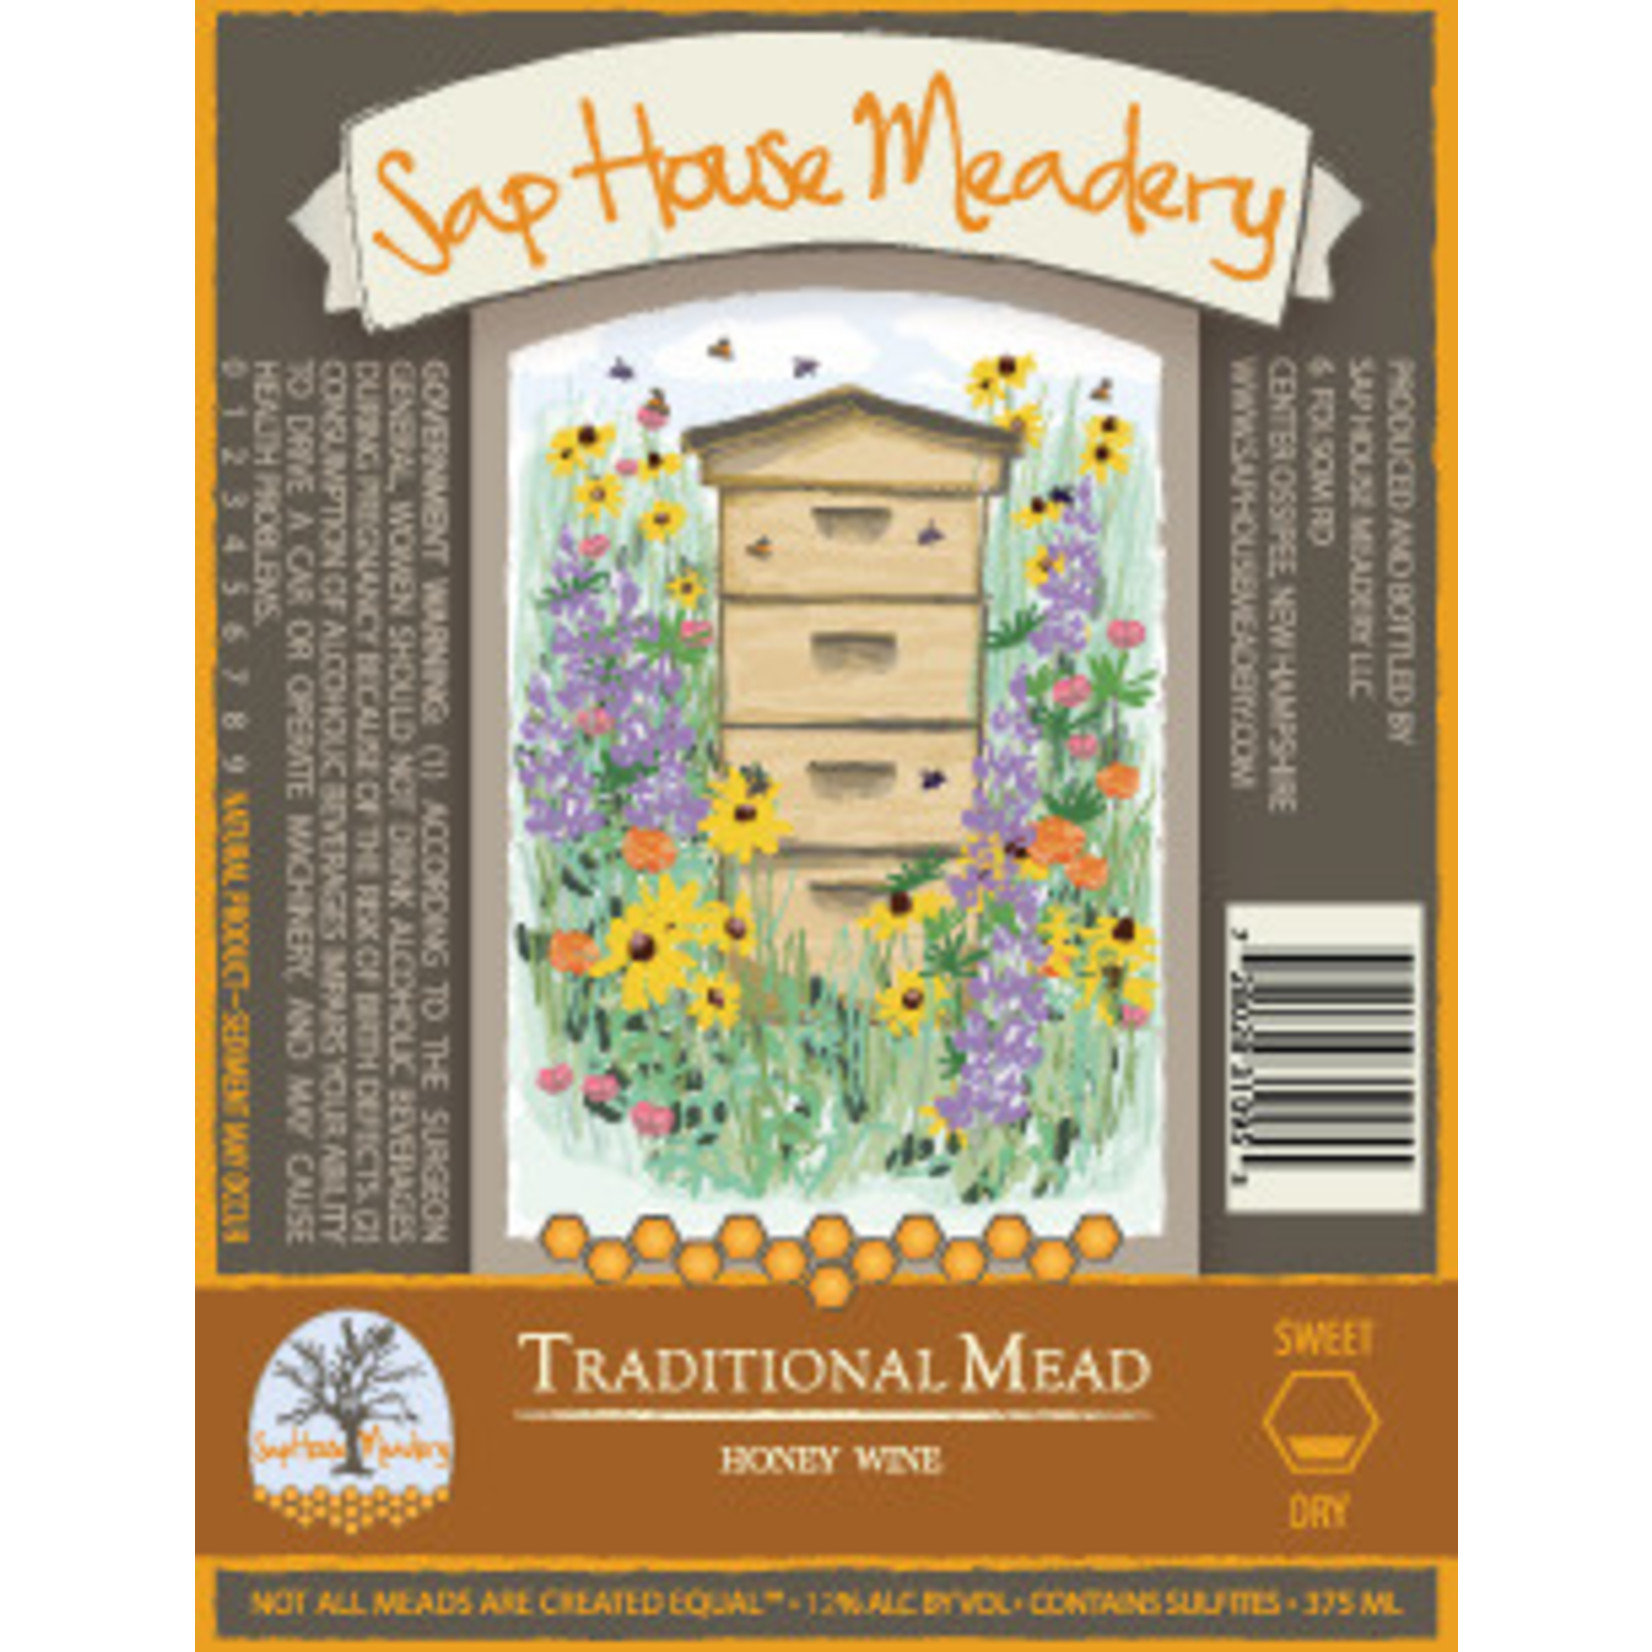 Sap House Meadery Traditional